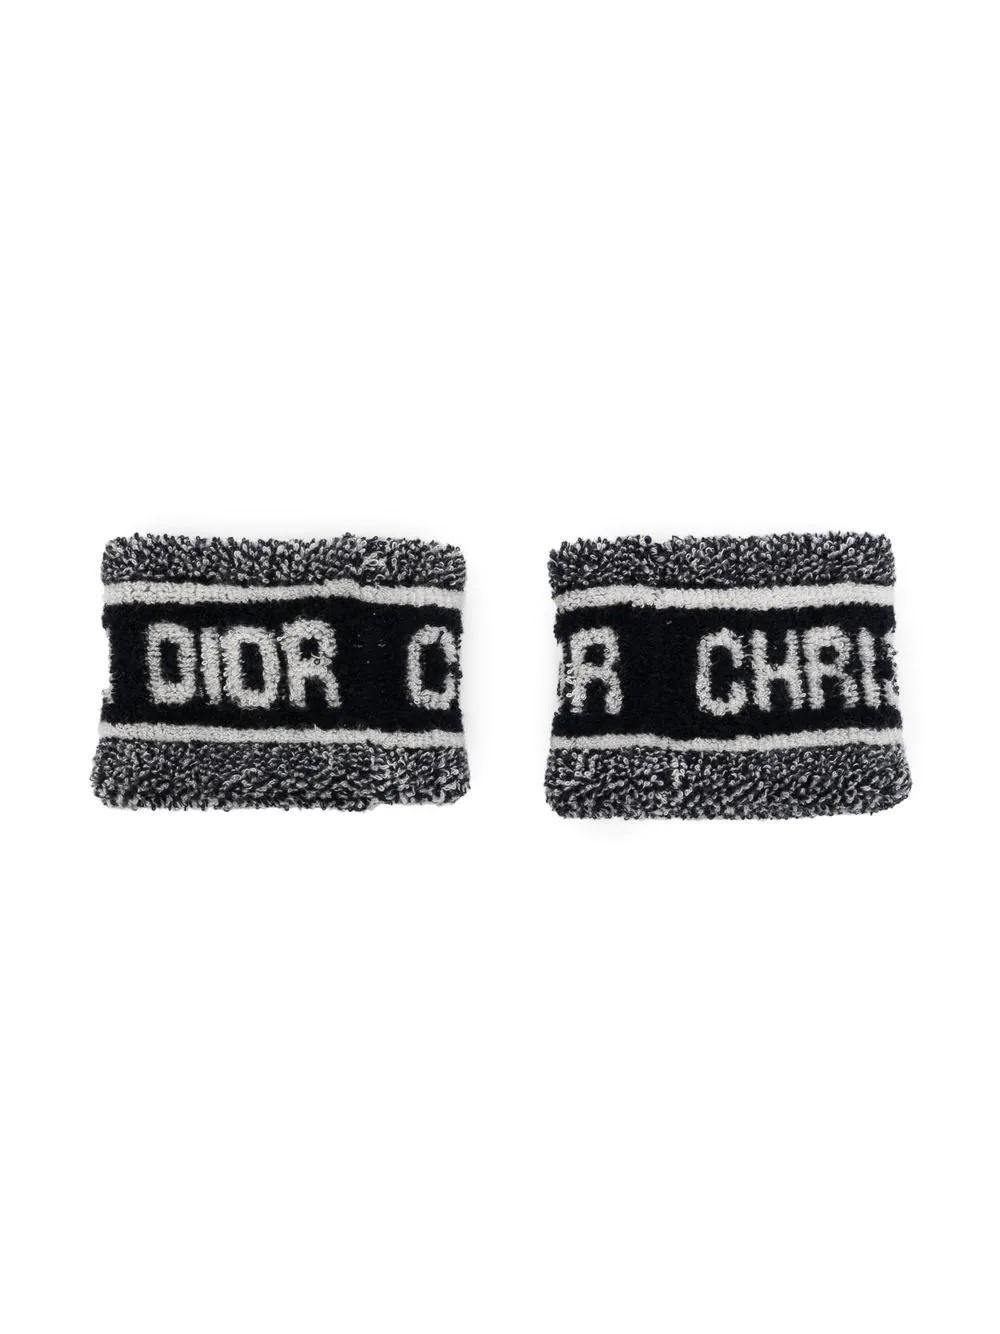 Perfect for a chic Tennis look, these terry Dior wristbands are both practical and a collector's item. This piece features terry cloth all over with the Christian Dior logo at the front of both bands

Colour: Blue & White

Size: